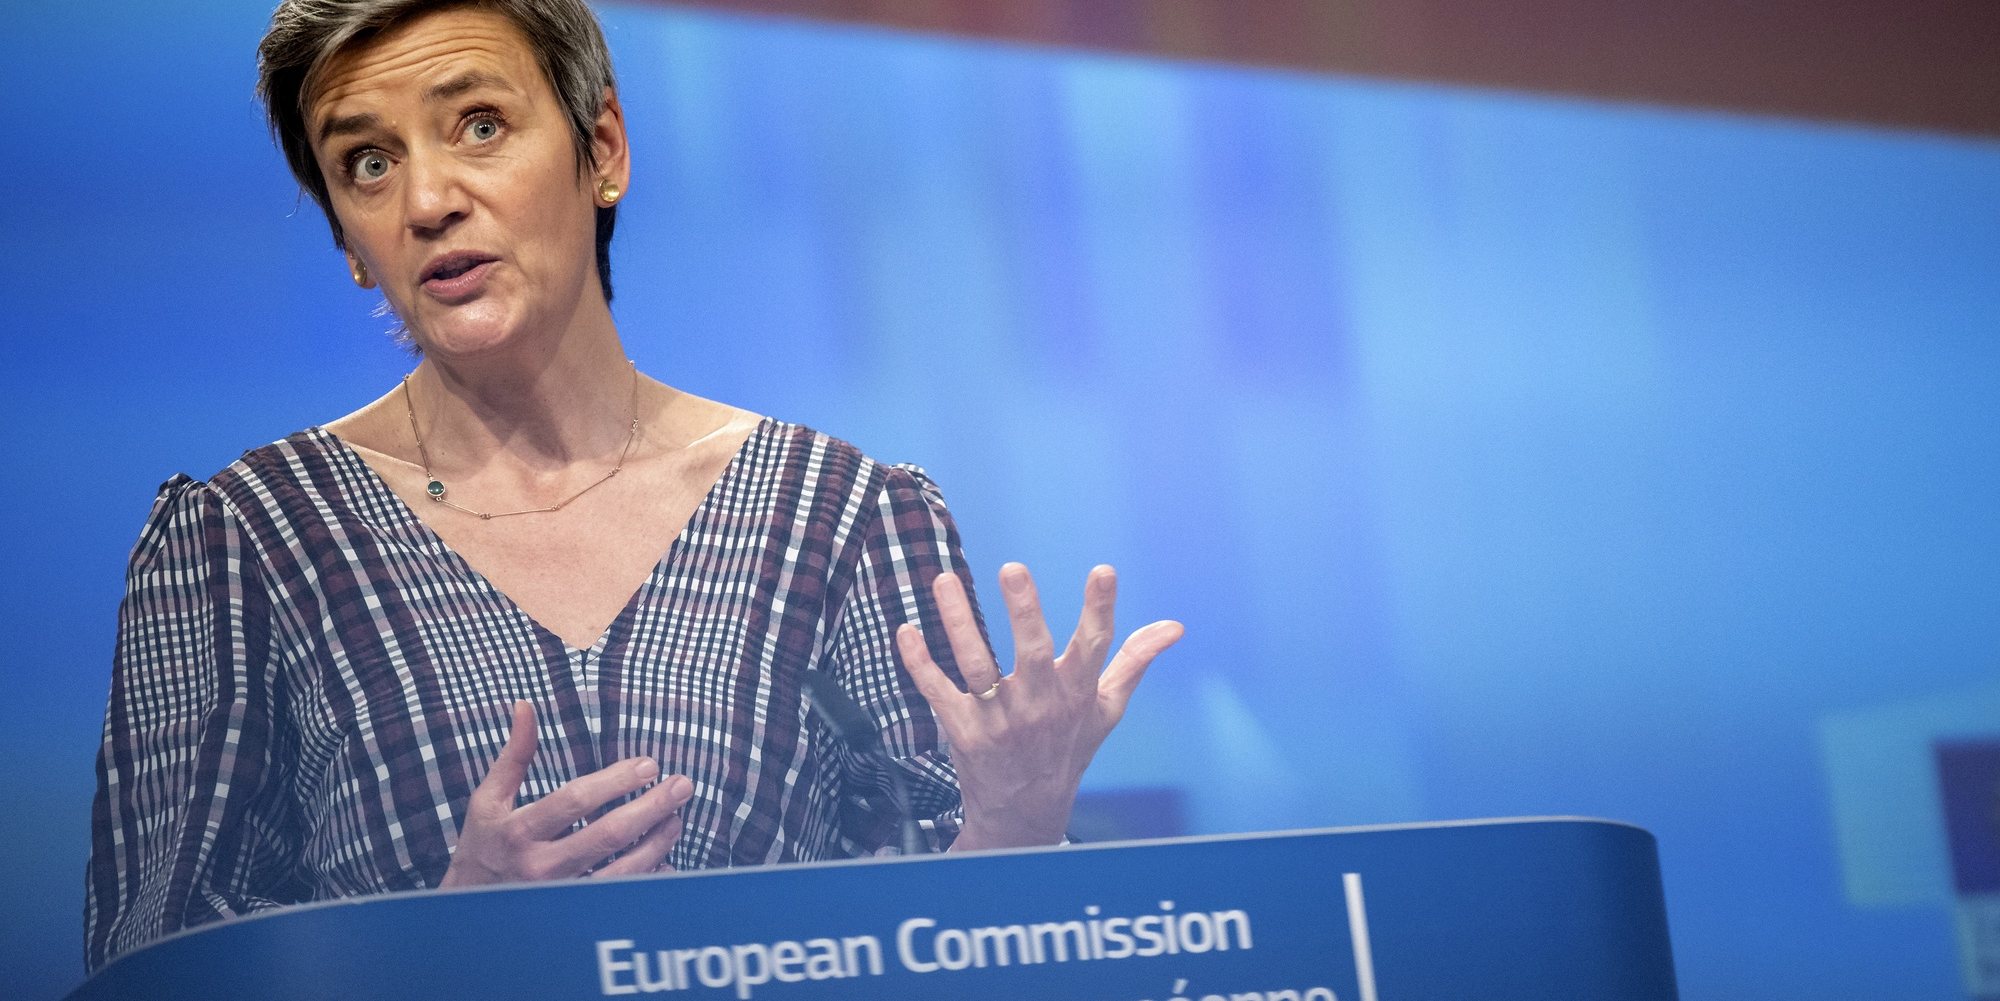 epa09033585 European Commissioner for Europe fit for the Digital Age Margrethe Vestager addresses a media conference at EU headquarters in Brussels, Belgium, 24 February 2021. The European Commission launched the first-stage of consultations of European social partners on how to improve the working conditions for people working through digital labour platforms.  EPA/OLIVIER MATTHYS / POOL